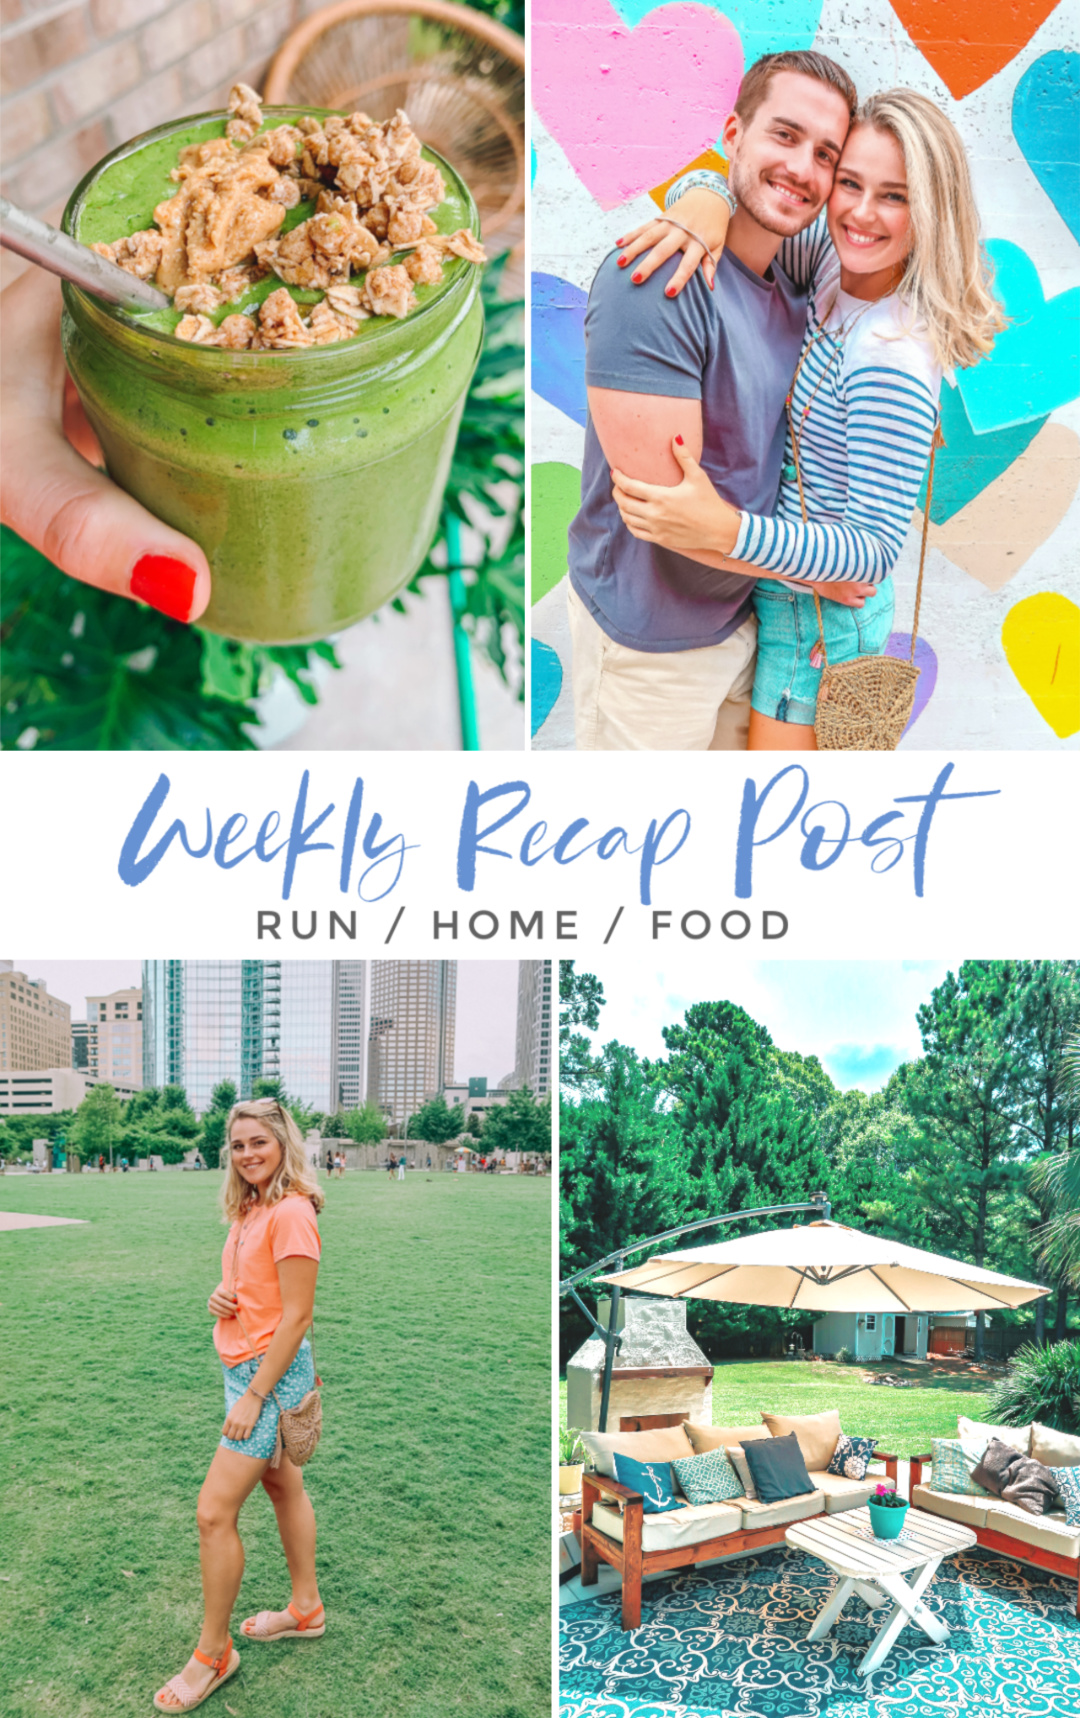 lifestyle blog, home decor, fashion, food, smoothie, gluten free, dairy free, green juice, healthy living, lifestyle, fun, life, relationships, home decor, family, candle making, healthy food, Charlotte nc, family, 4th off July